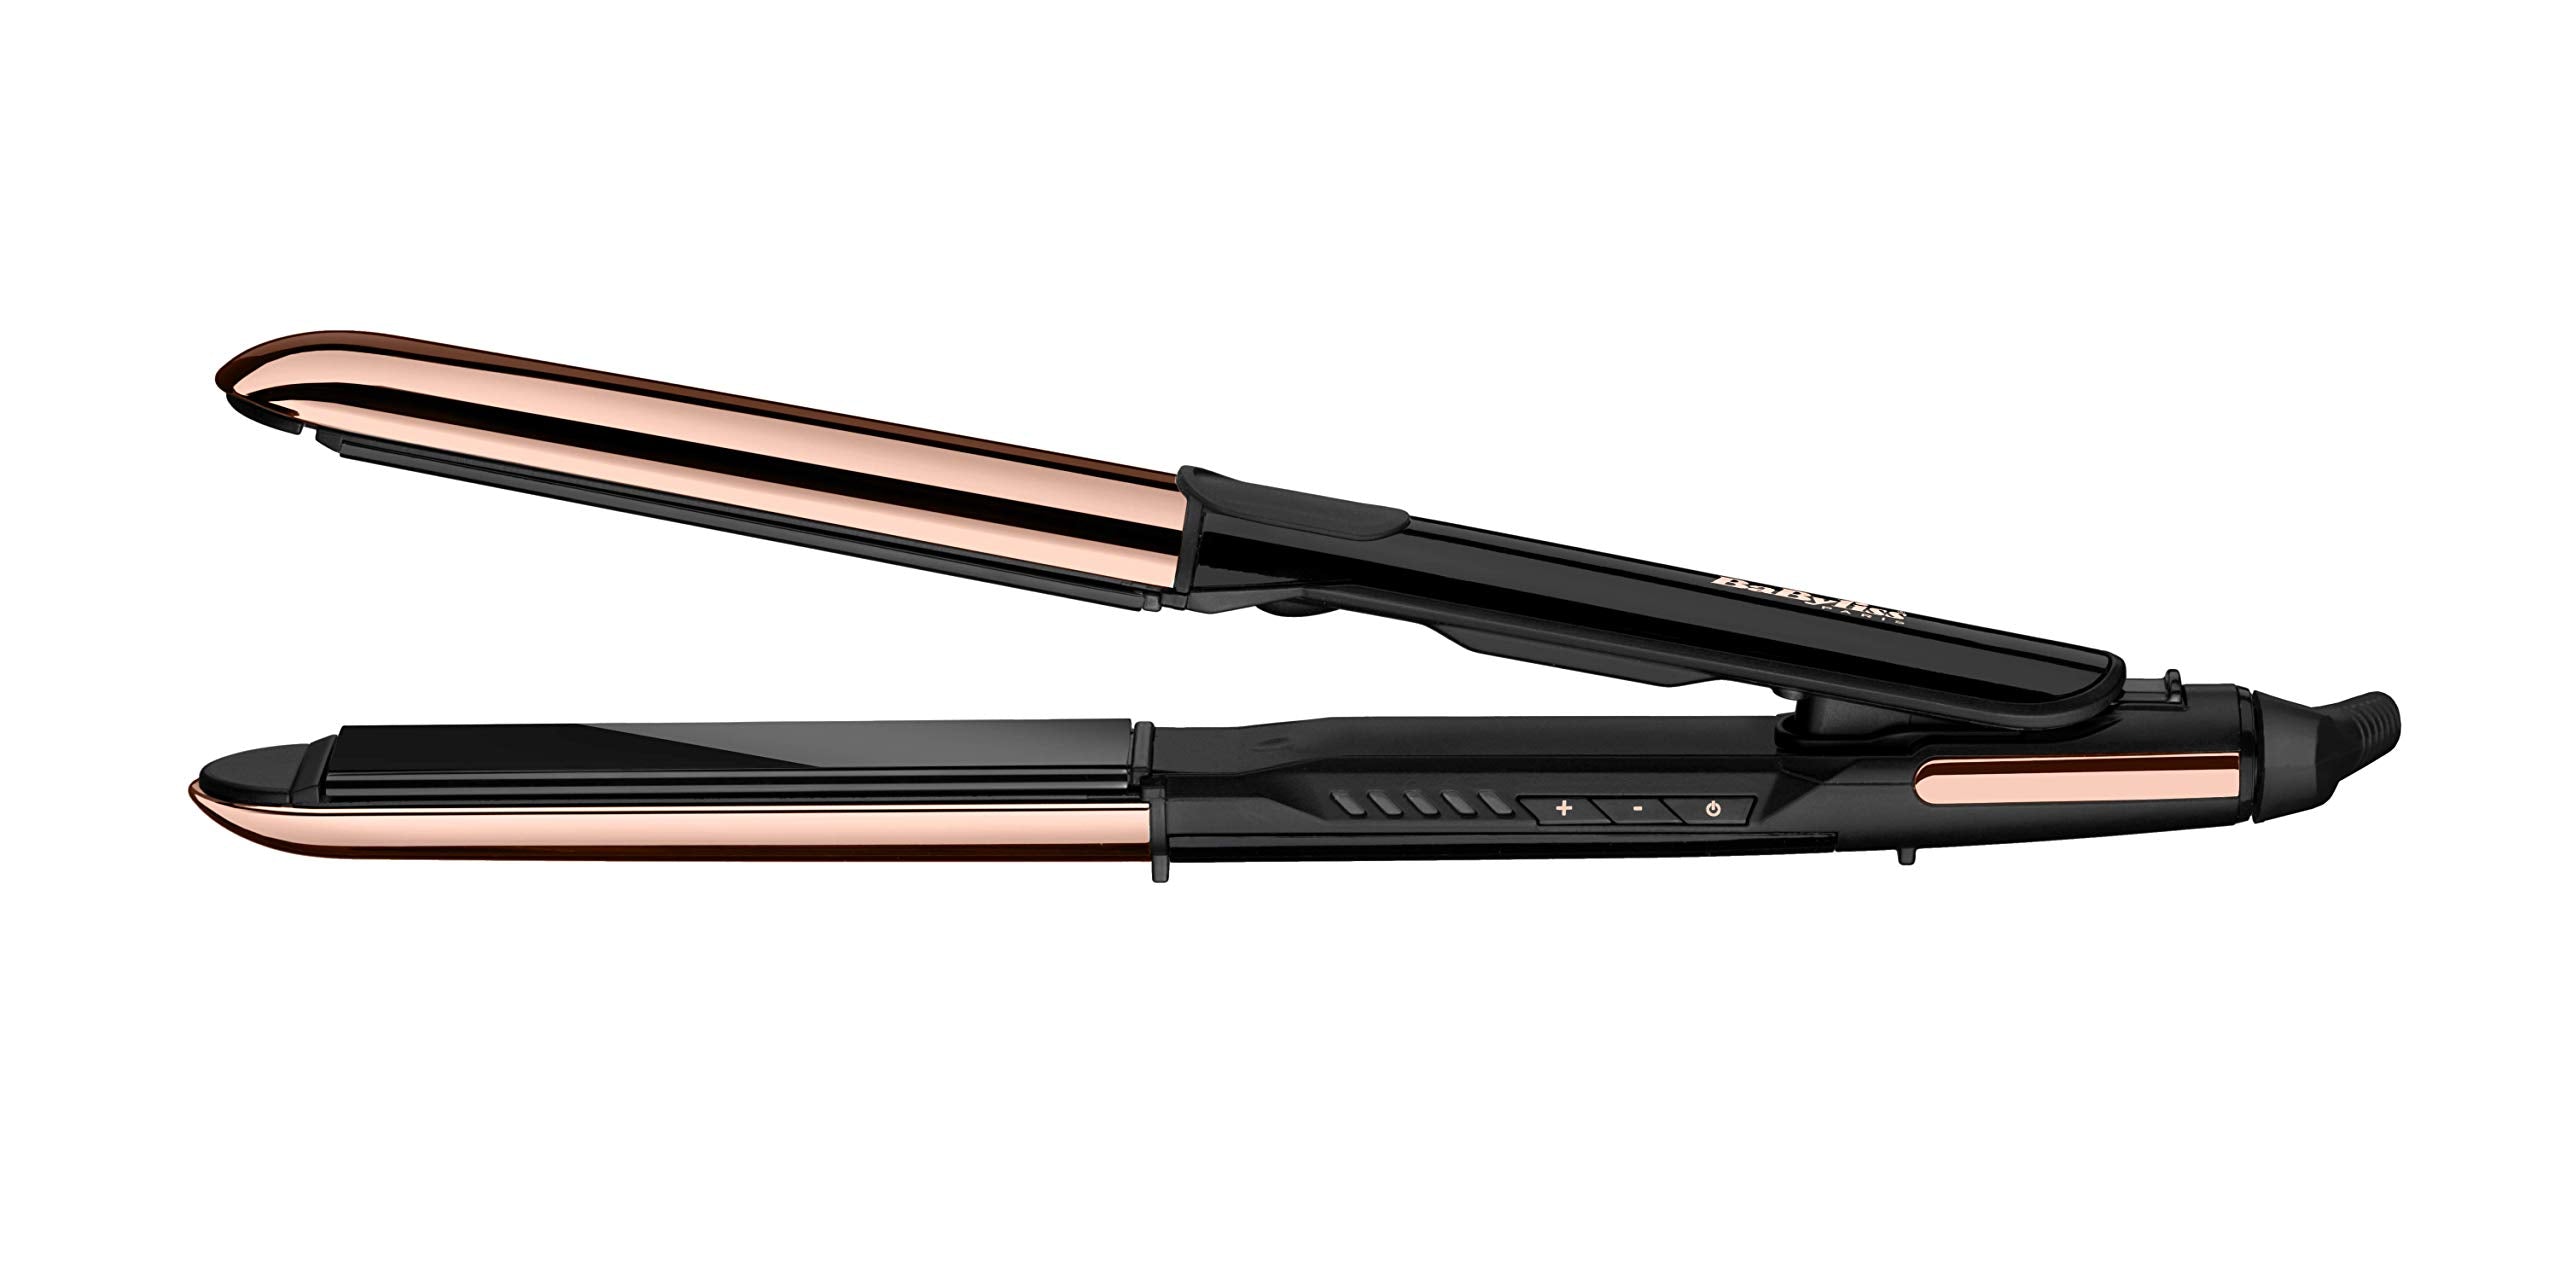 BaByliss Straightener, 28mm Titanium Plates For Efficient Styling, 5 Temperature Settings For Versatility With Fast Heat-up Time, Lightweight And Ergonomic Design With Shiny Results, ST482SDE (Gold)